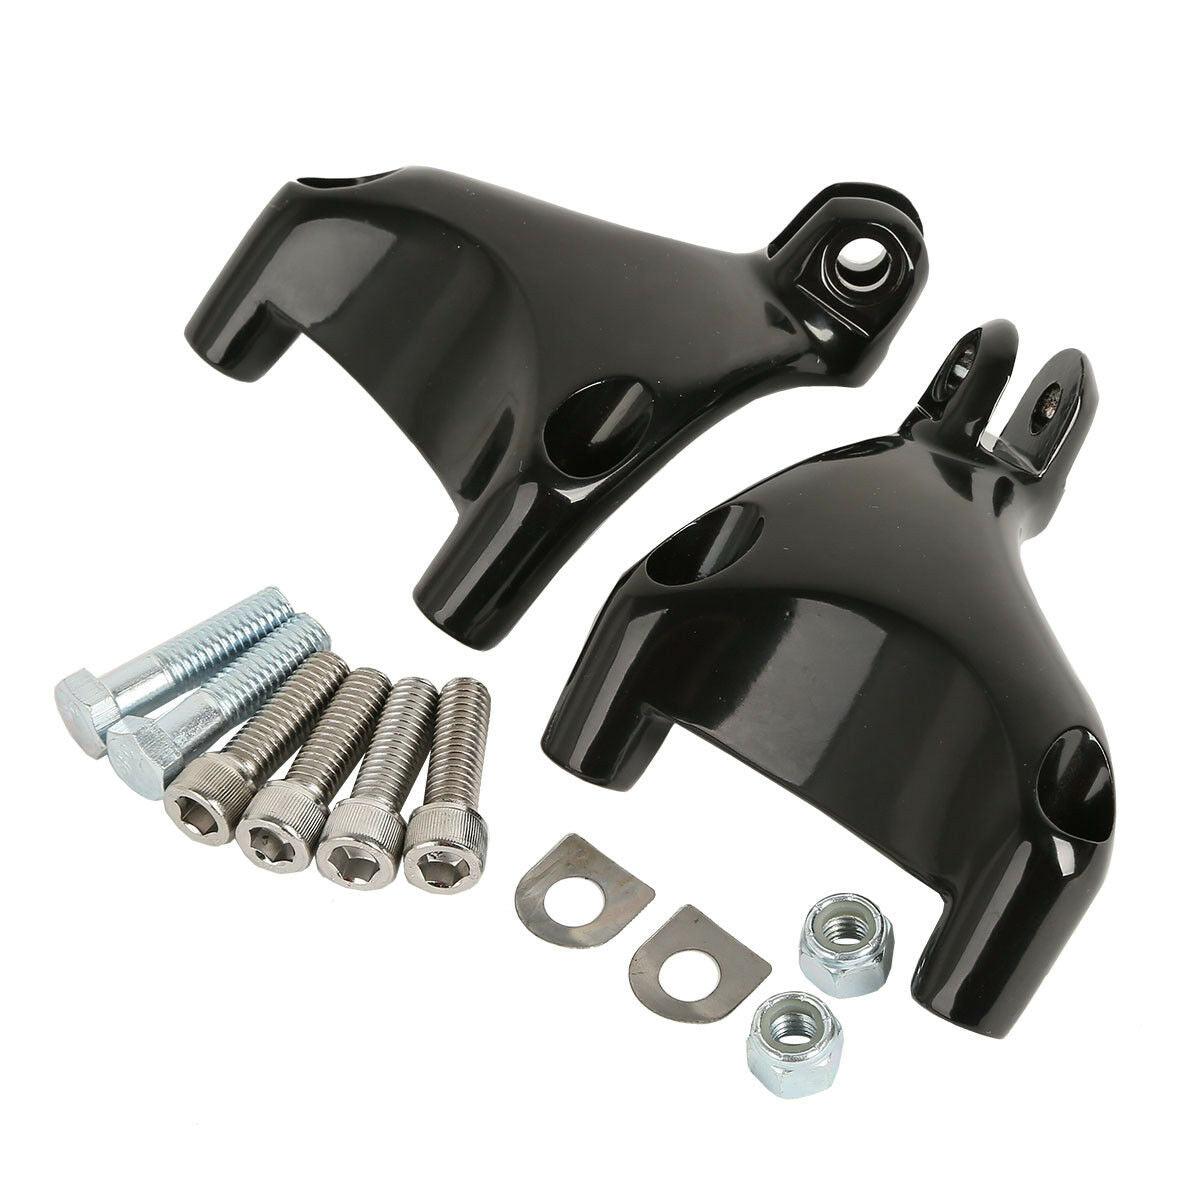 Pegstreamliner FootPegs Pedal &Mount Fit For Harley Sportster XL883 XL1200 04-13 - Moto Life Products